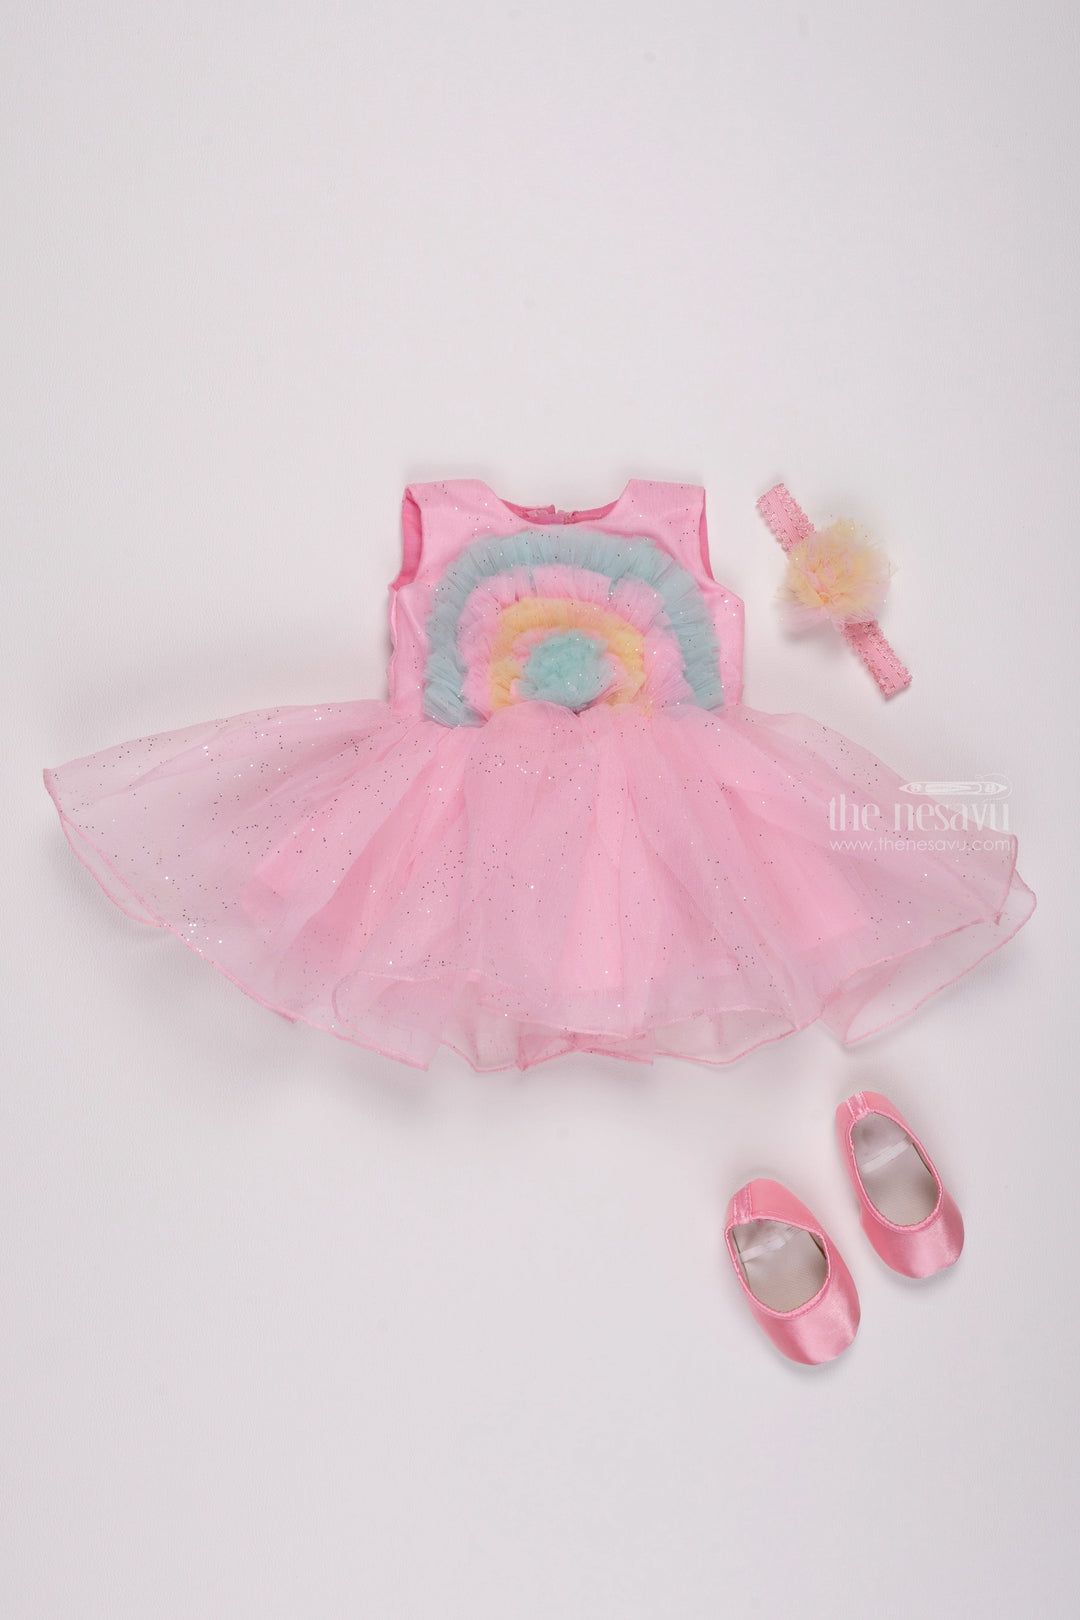 The Nesavu Girls Tutu Frock Petal Pink Parade: Multicolor Layered Party Frock with Vibrant Applique Designs Nesavu 12 (3M) / Pink / Plain Net PF142B-12 Birthday Girl Outfit Frock Selections | Trendy Dresses for Little Girls | The Nesavu